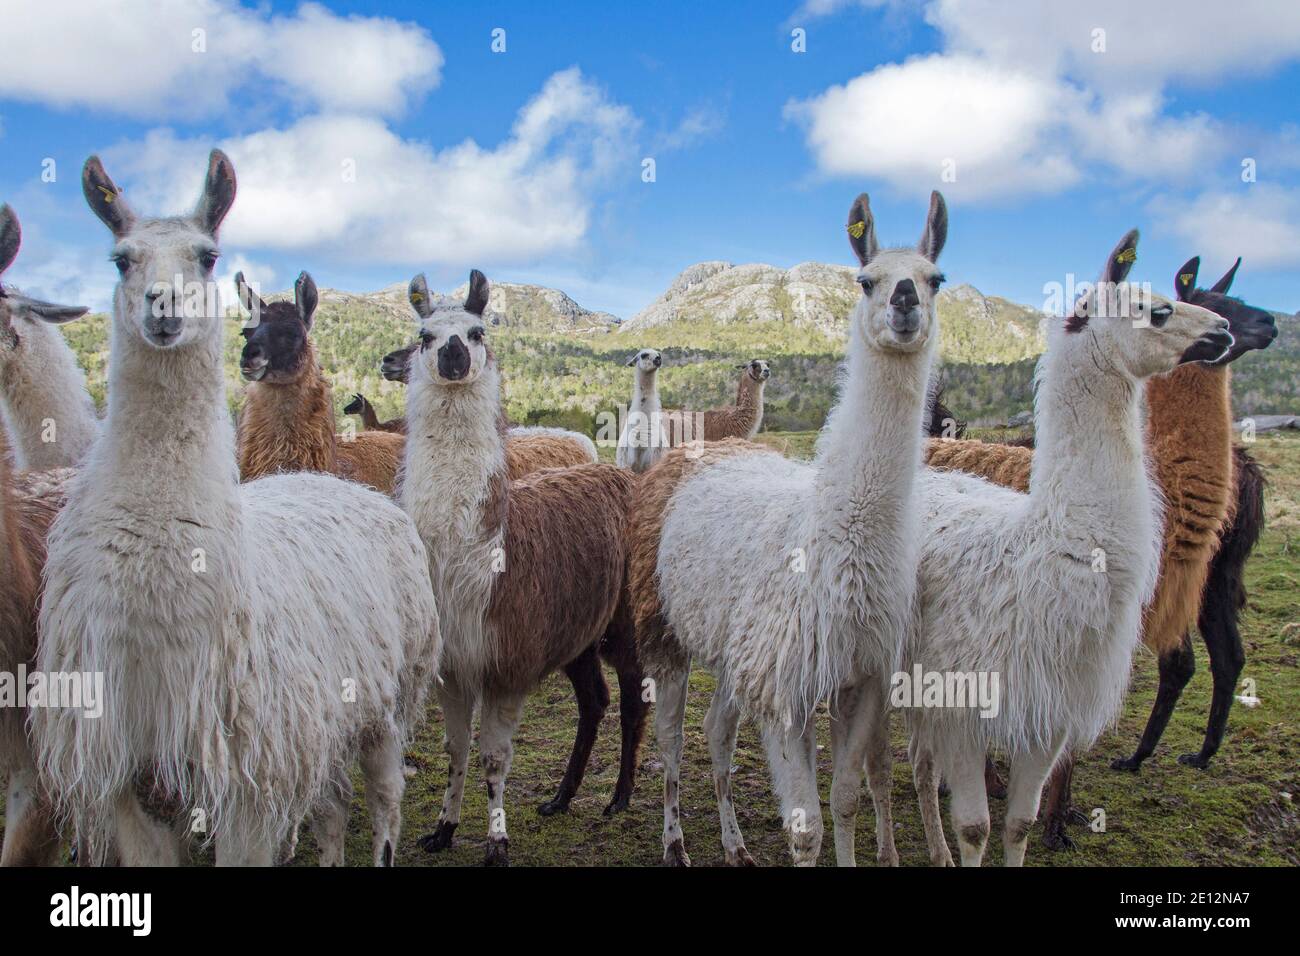 A Group Of Lamas Are Grazing On A Mountain Meadow In The Norwegian Mountains Stock Photo